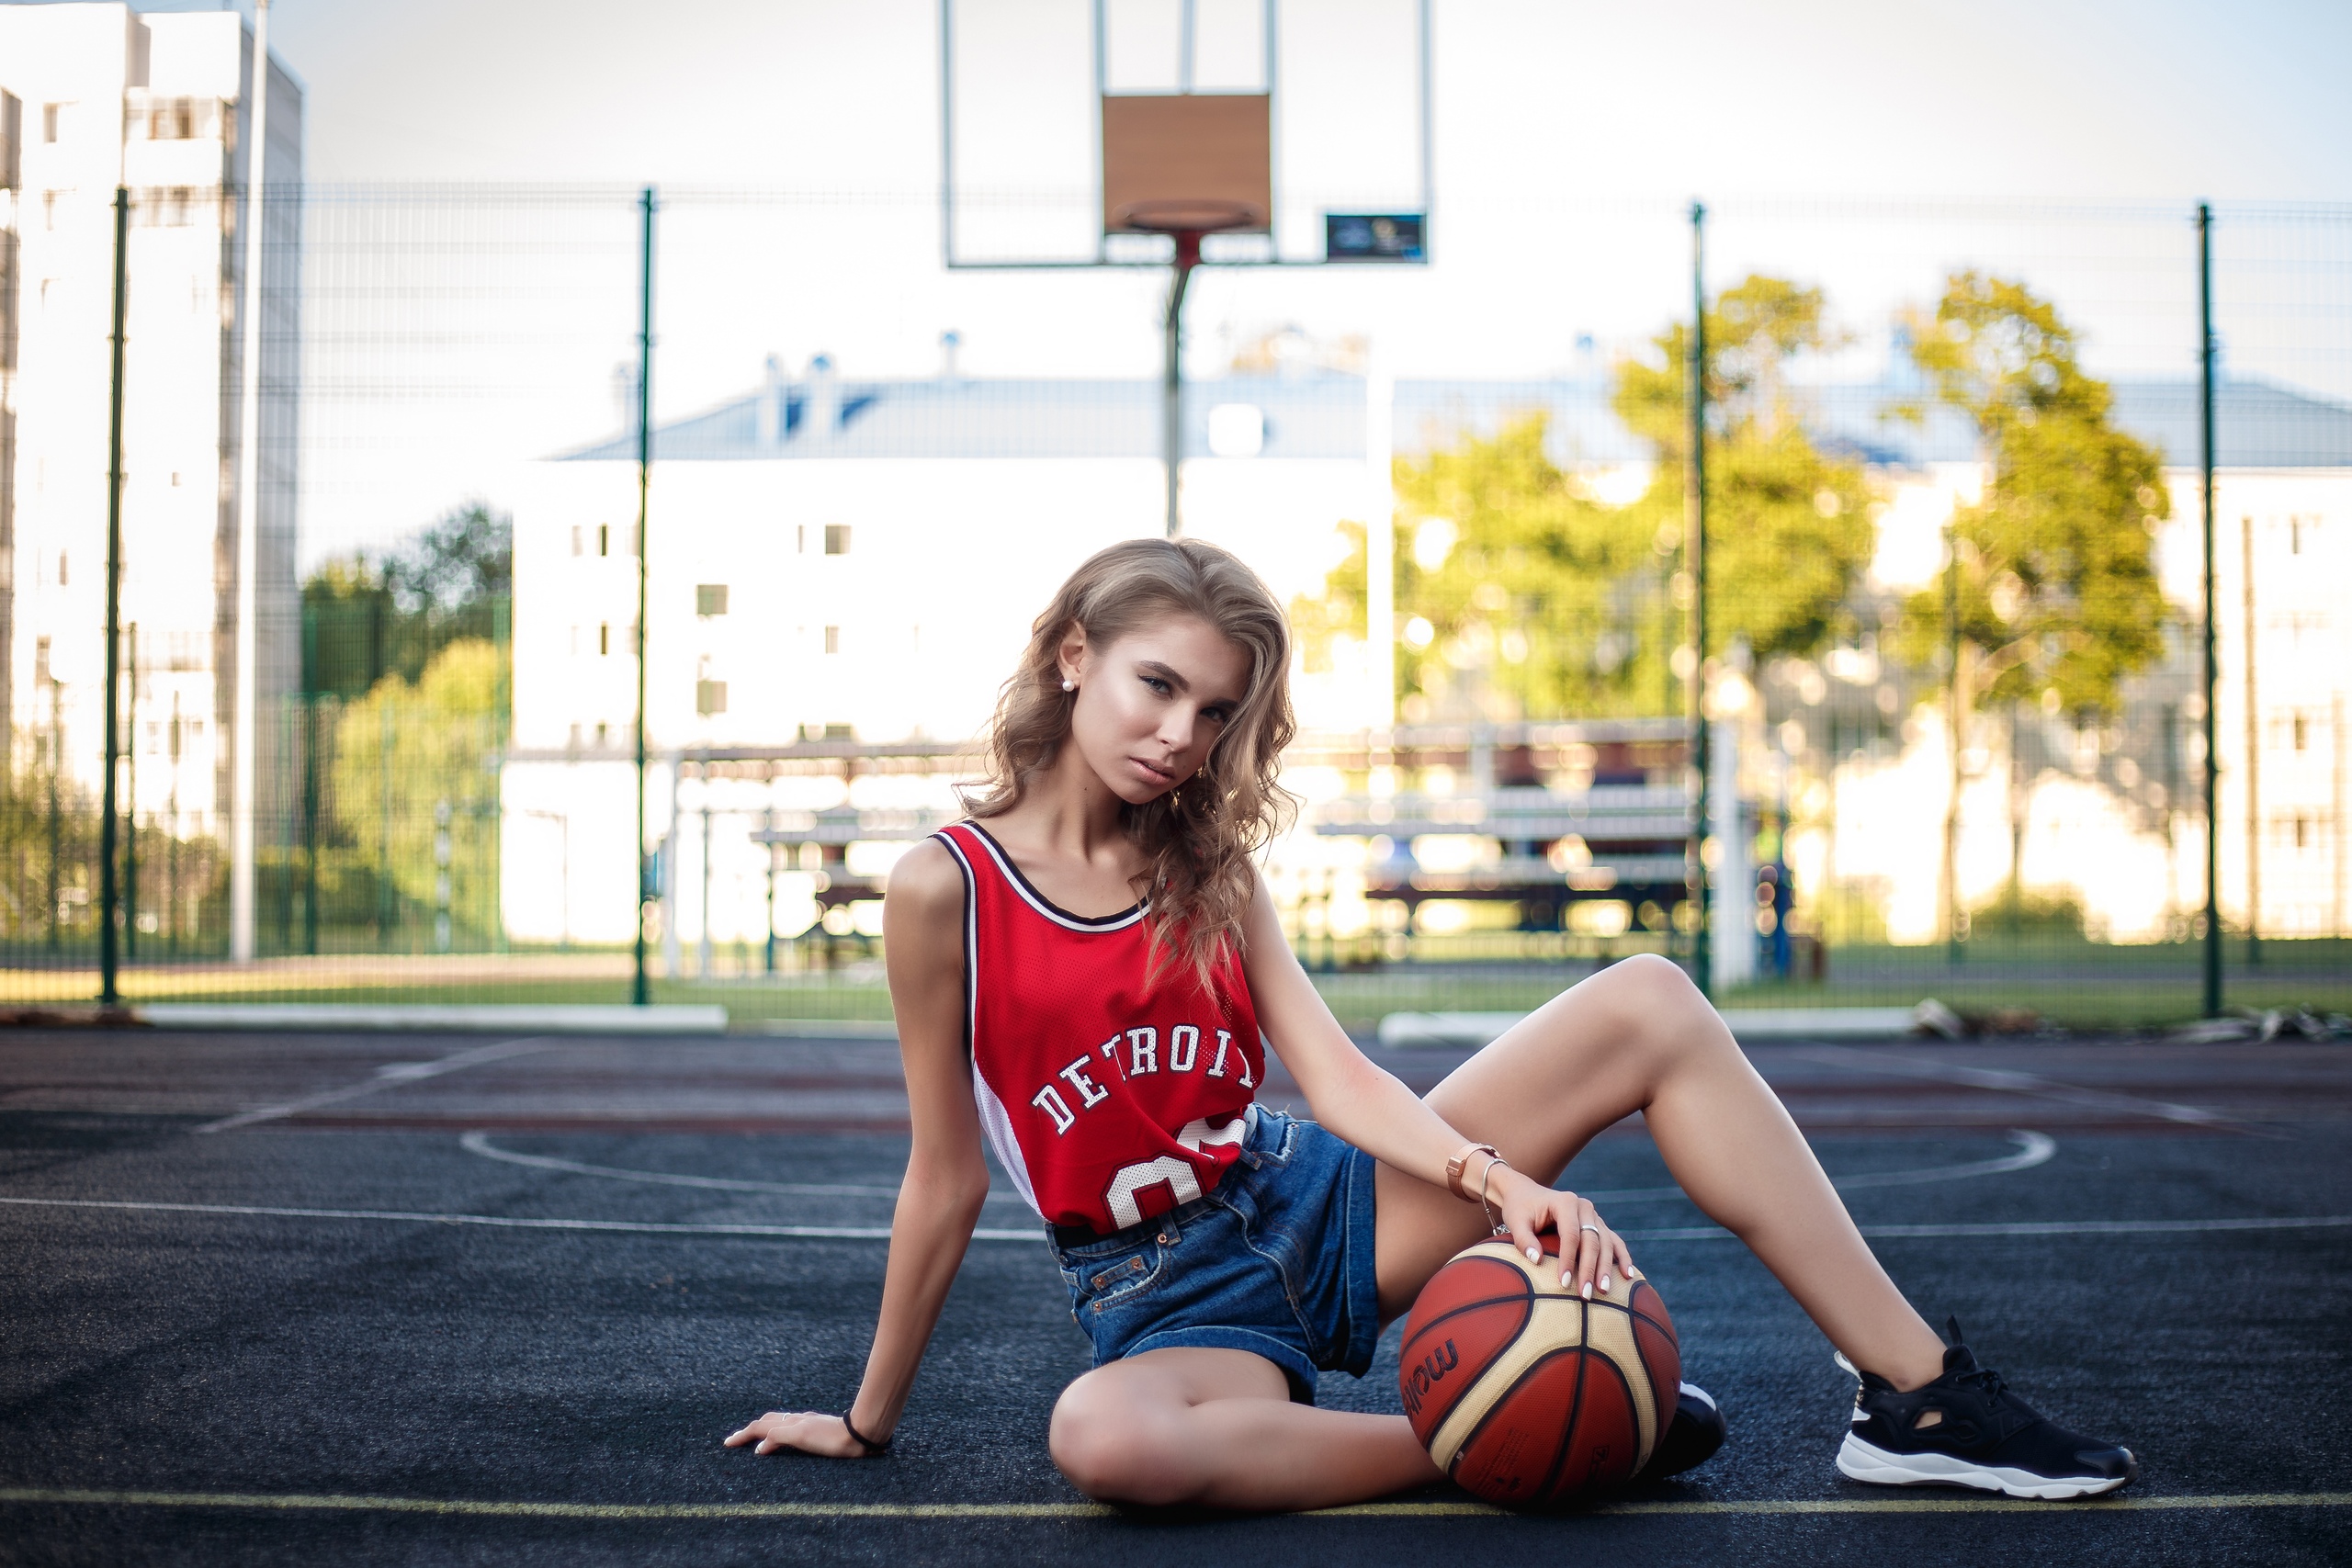 People 2560x1707 women model outdoors sports jerseys jean shorts on the floor basketball ball sneakers basketball court depth of field looking at viewer sitting women outdoors spread legs